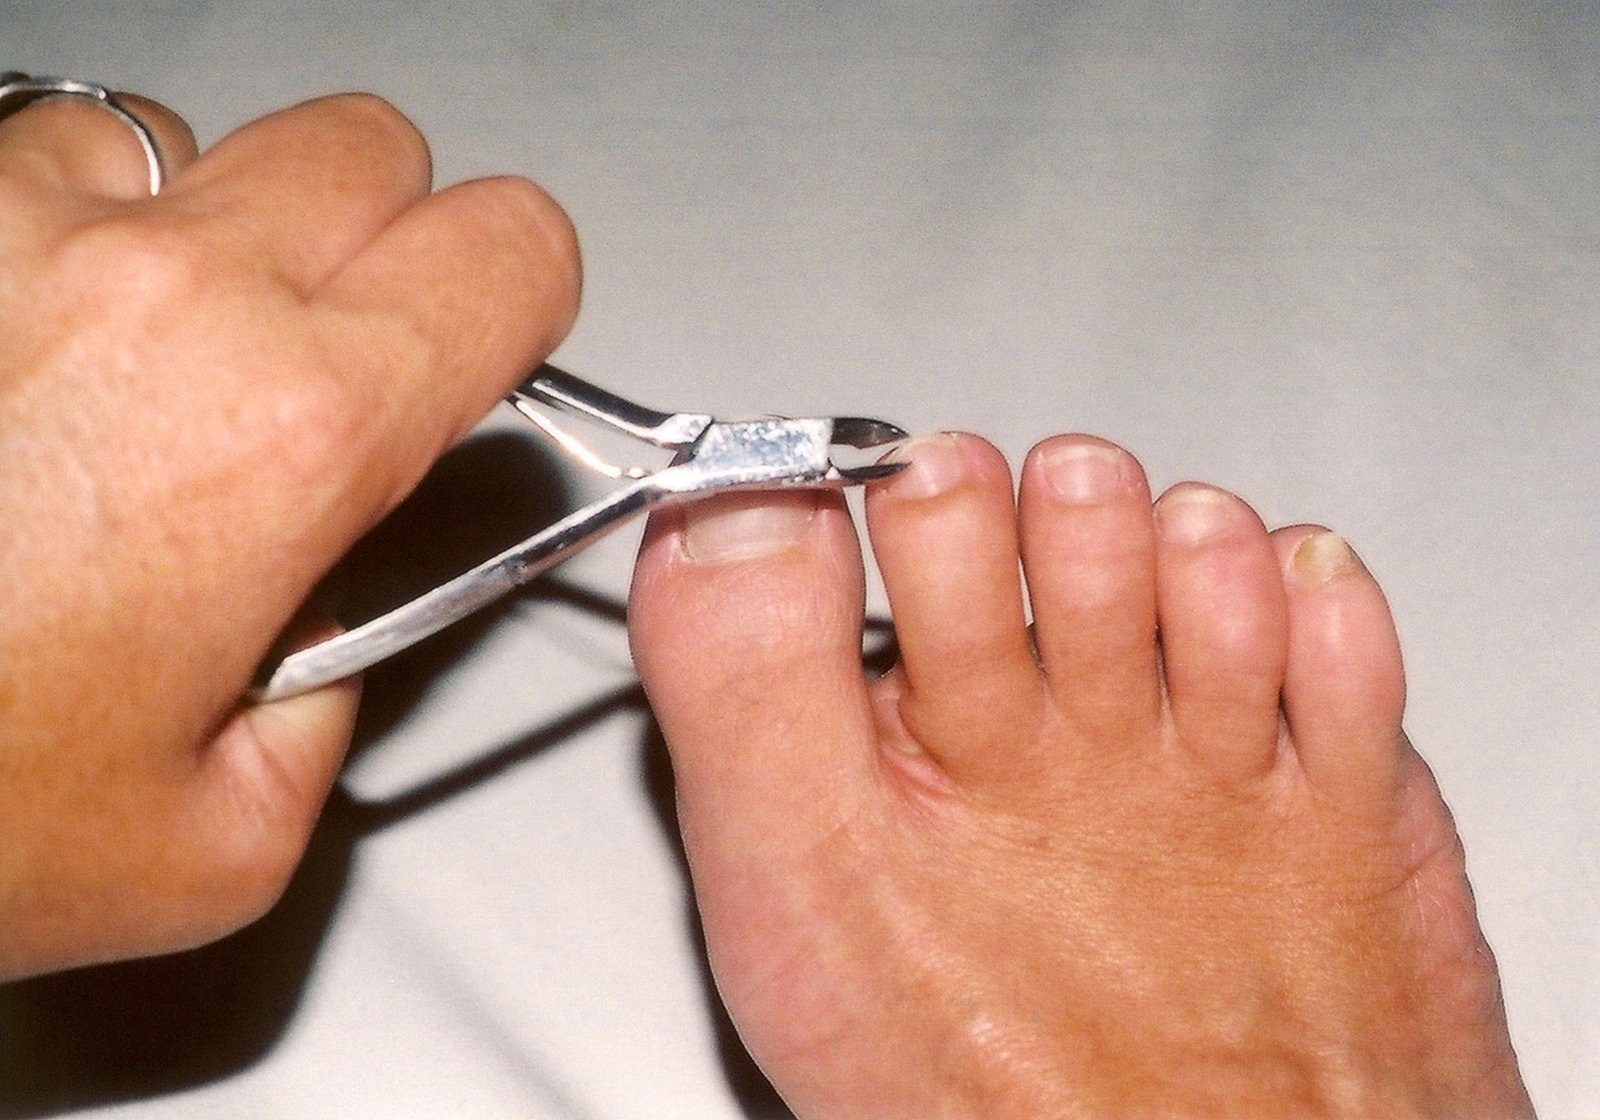 a woman is trimming the toe of a pair of scissors